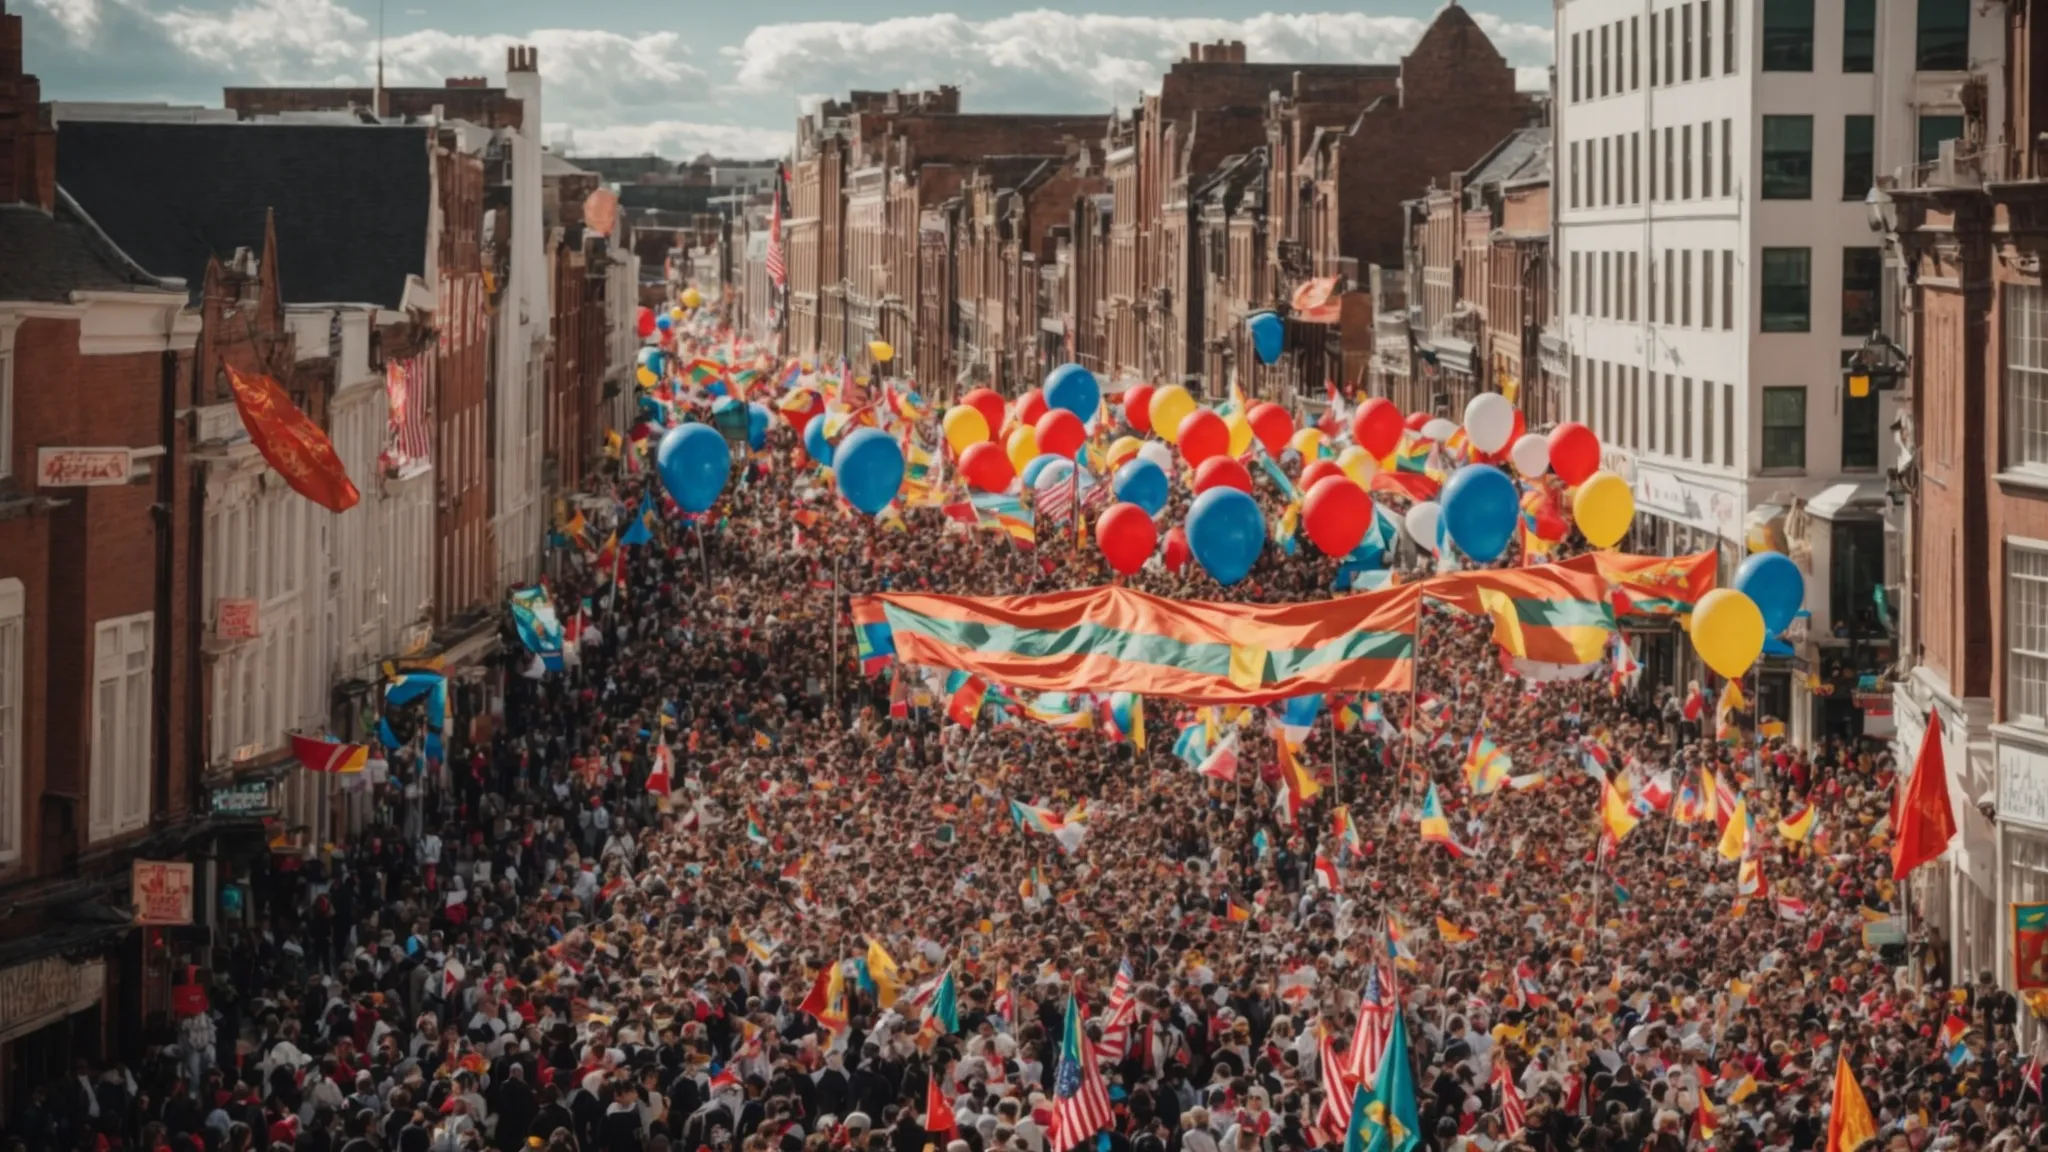 a colorful parade marches down a birmingham street under a bright sky, with fluttering flags and jubilant crowds, capturing the city’s festive spirit.